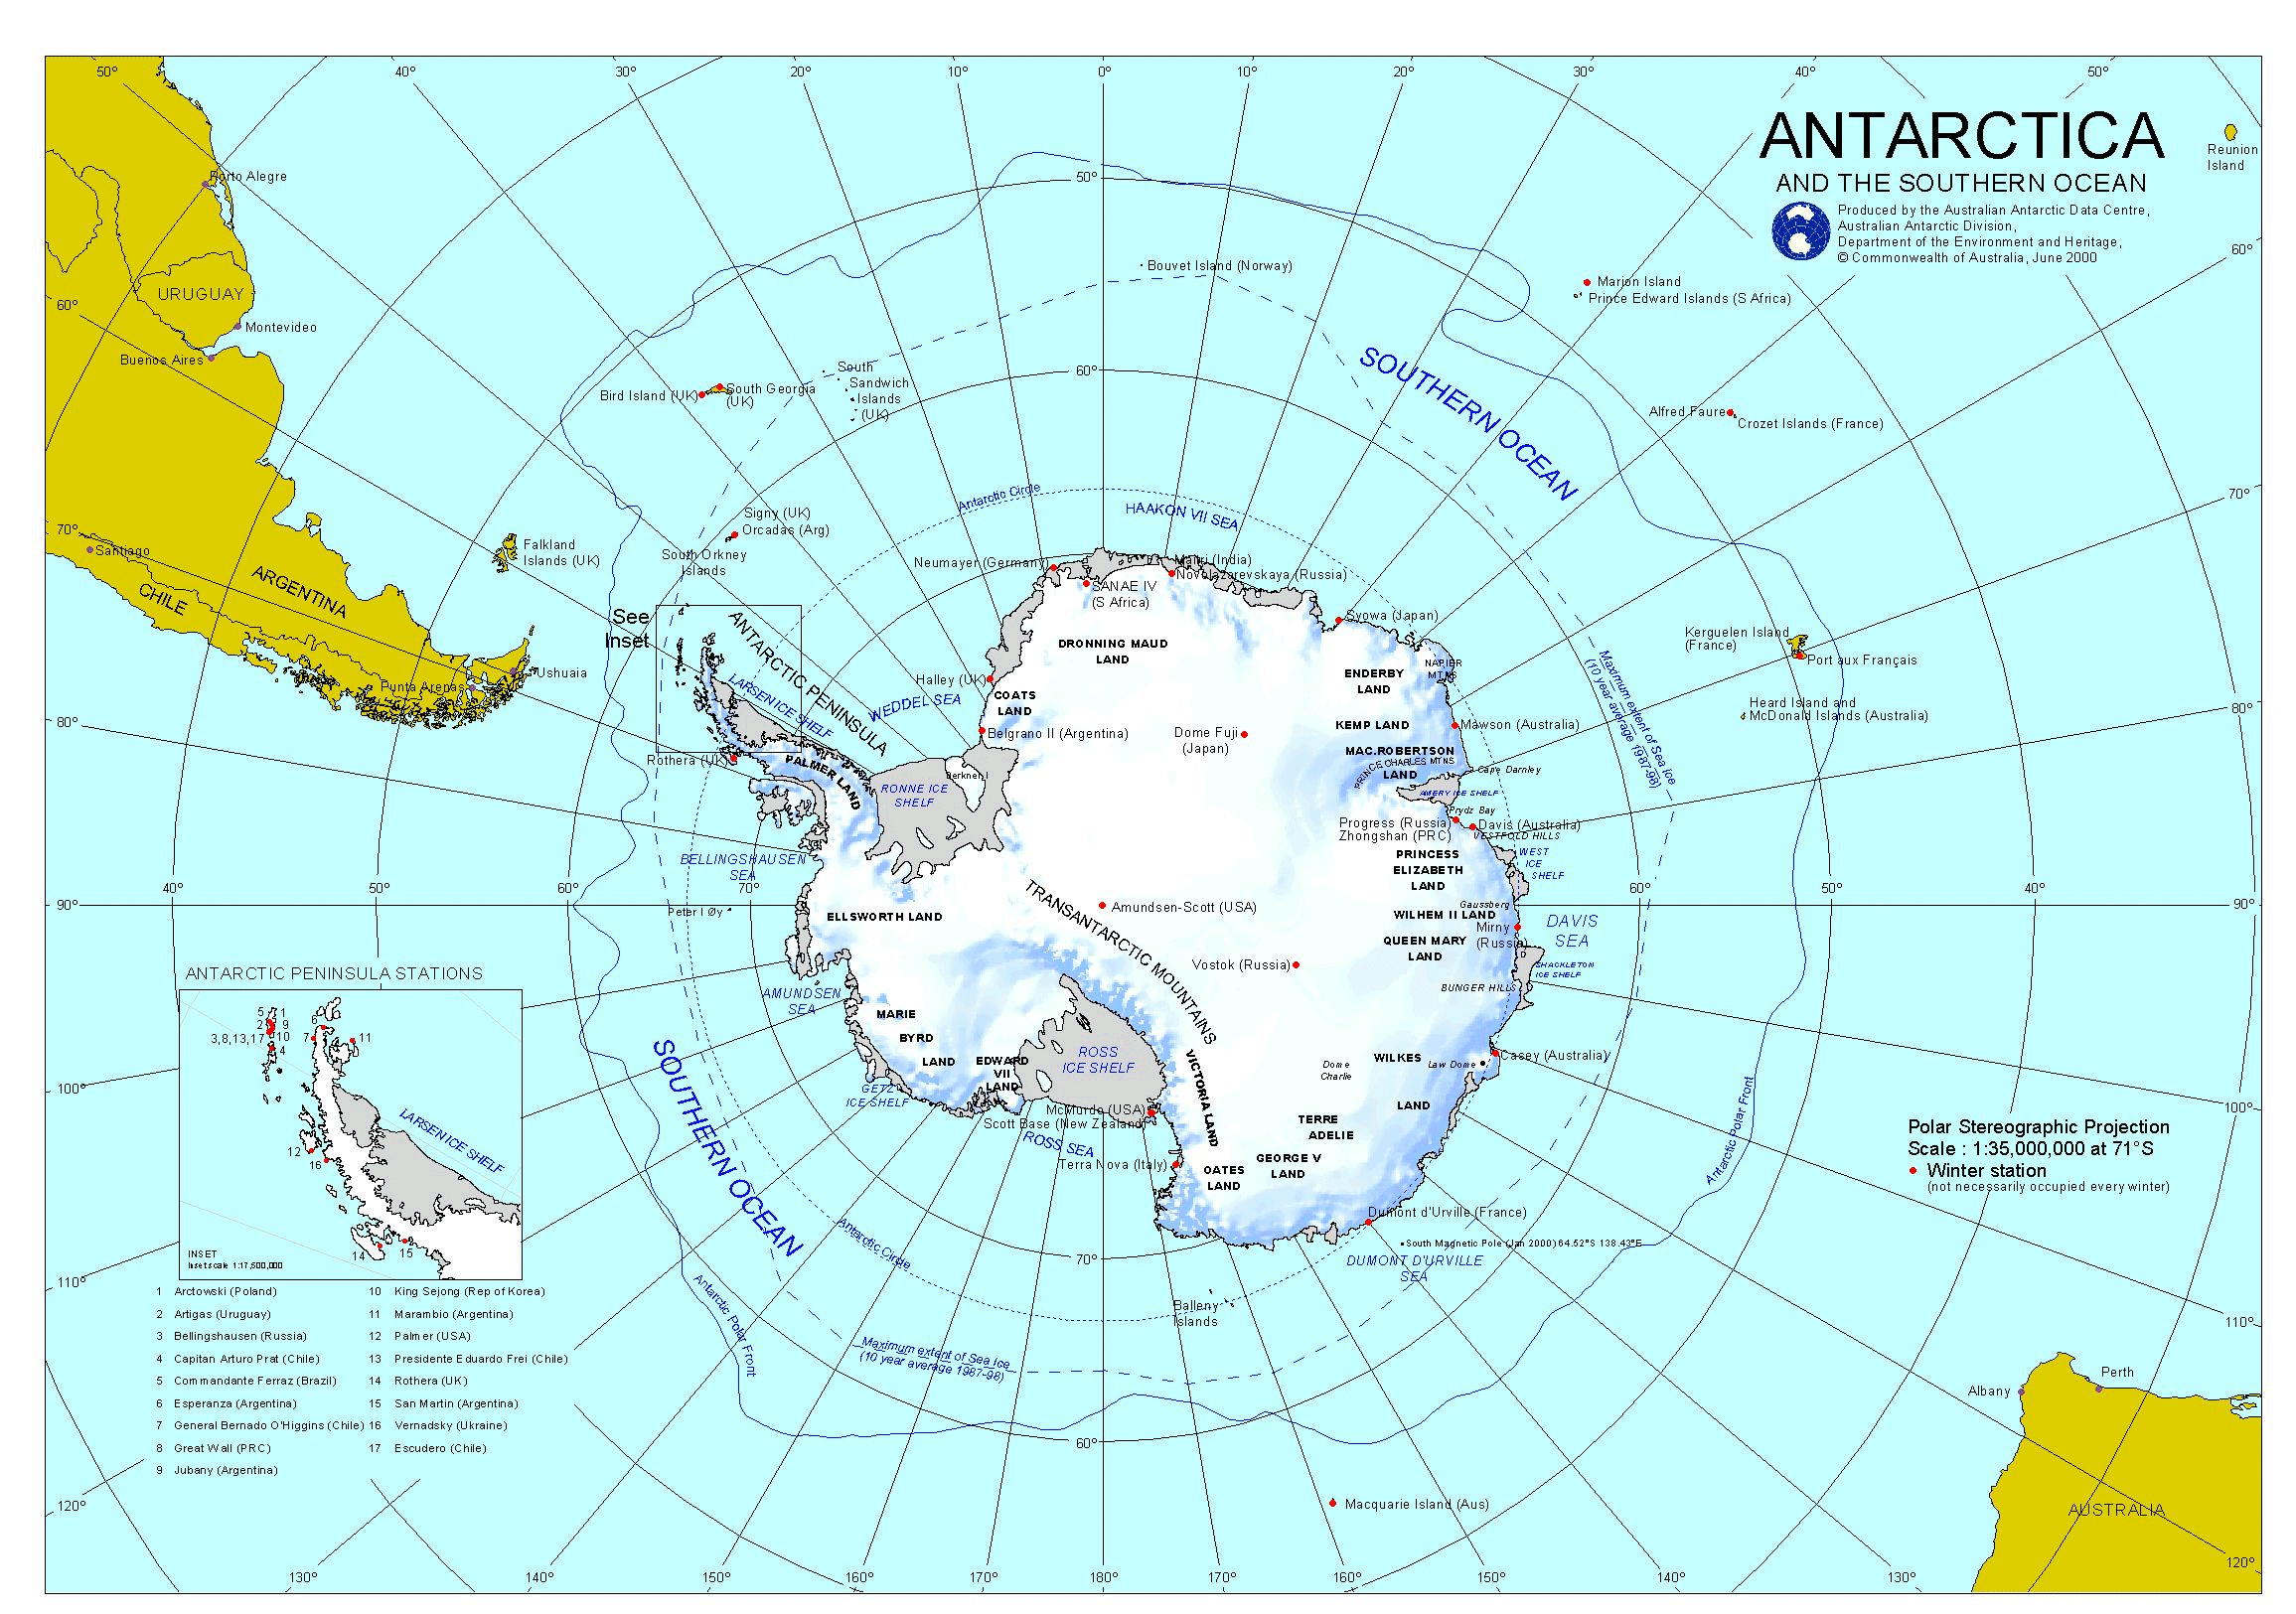 antarctica-peninsula-is-the-most-easily-acessible-part-of-antarctica-be-a-citizen-of-the